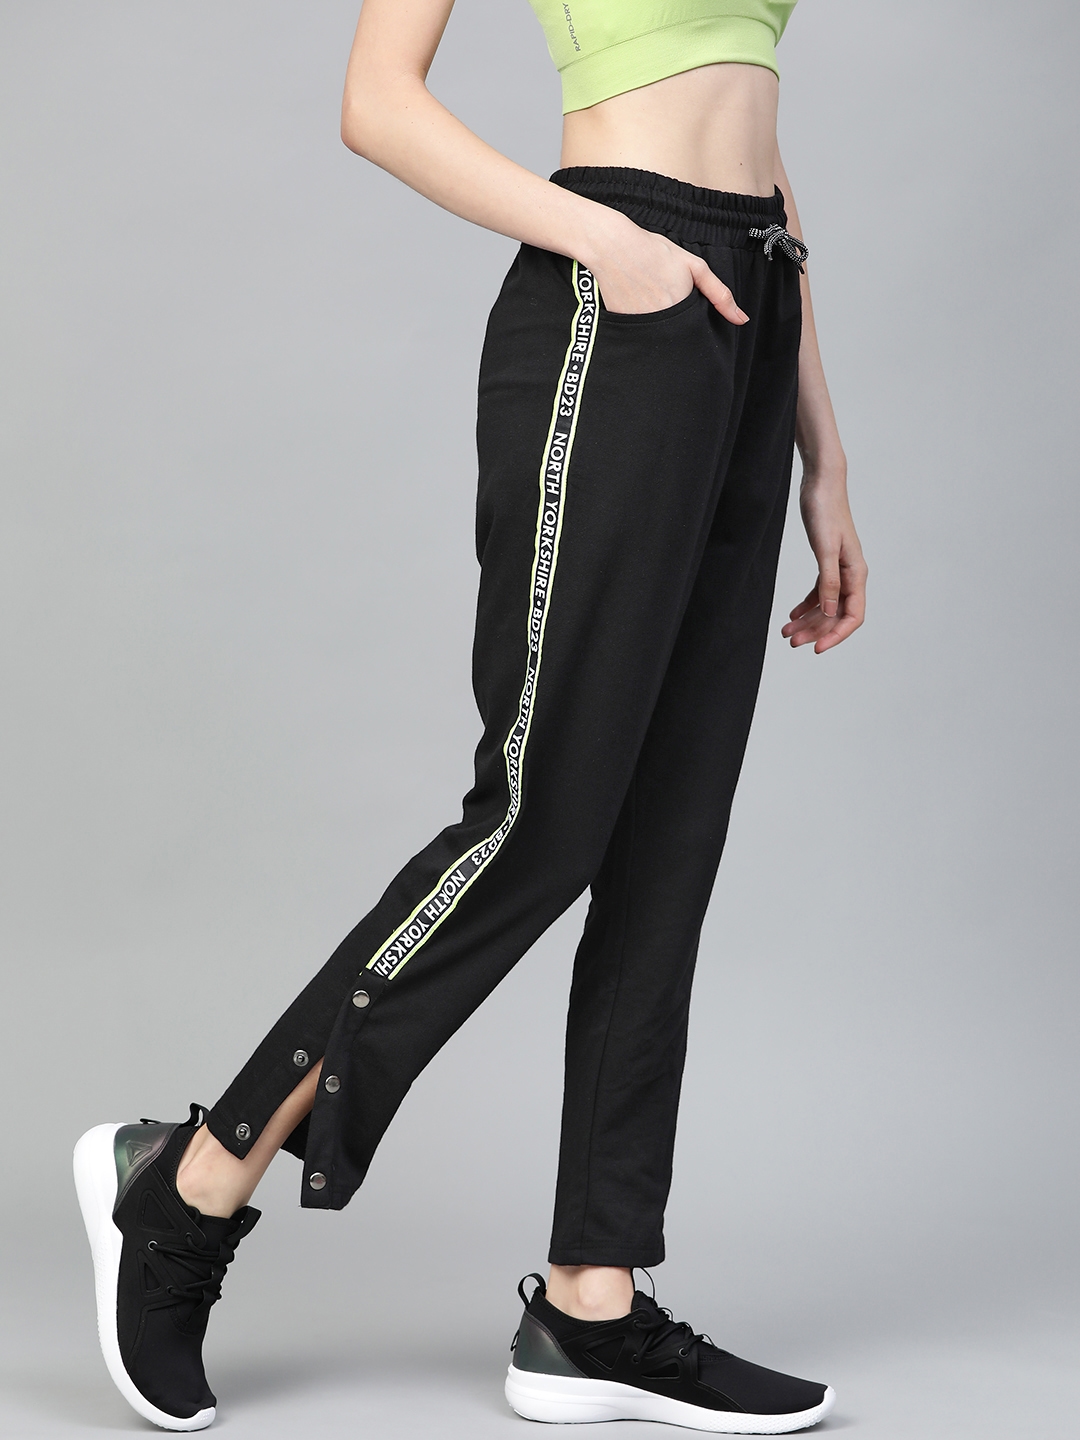 Details more than 92 myntra track pants ladies super hot